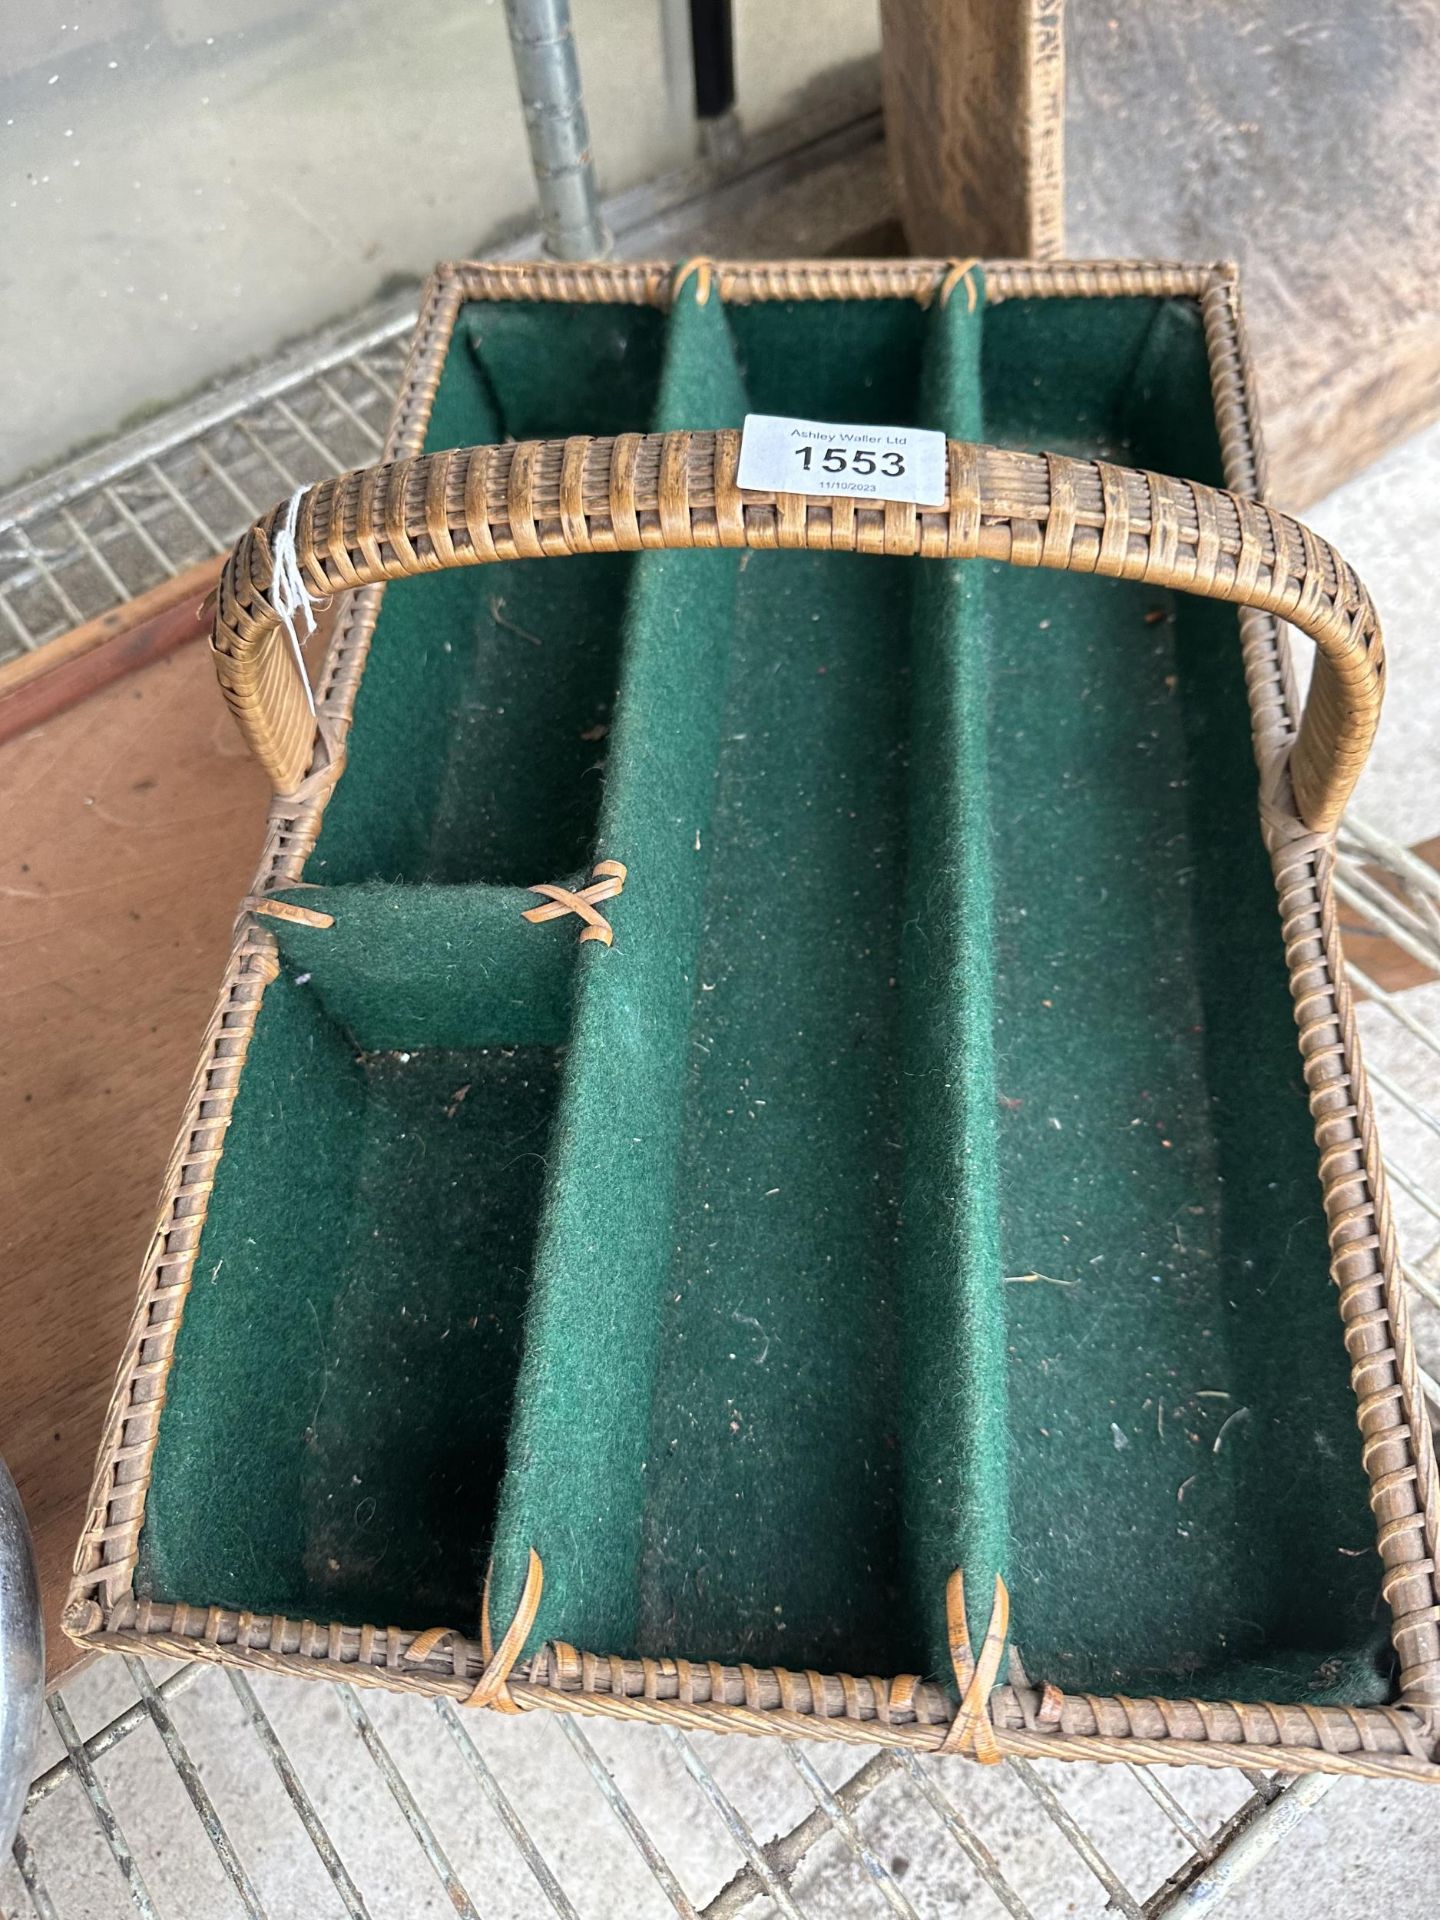 A VINTAGE WICKER CUTTLERY TRAY - Image 2 of 2